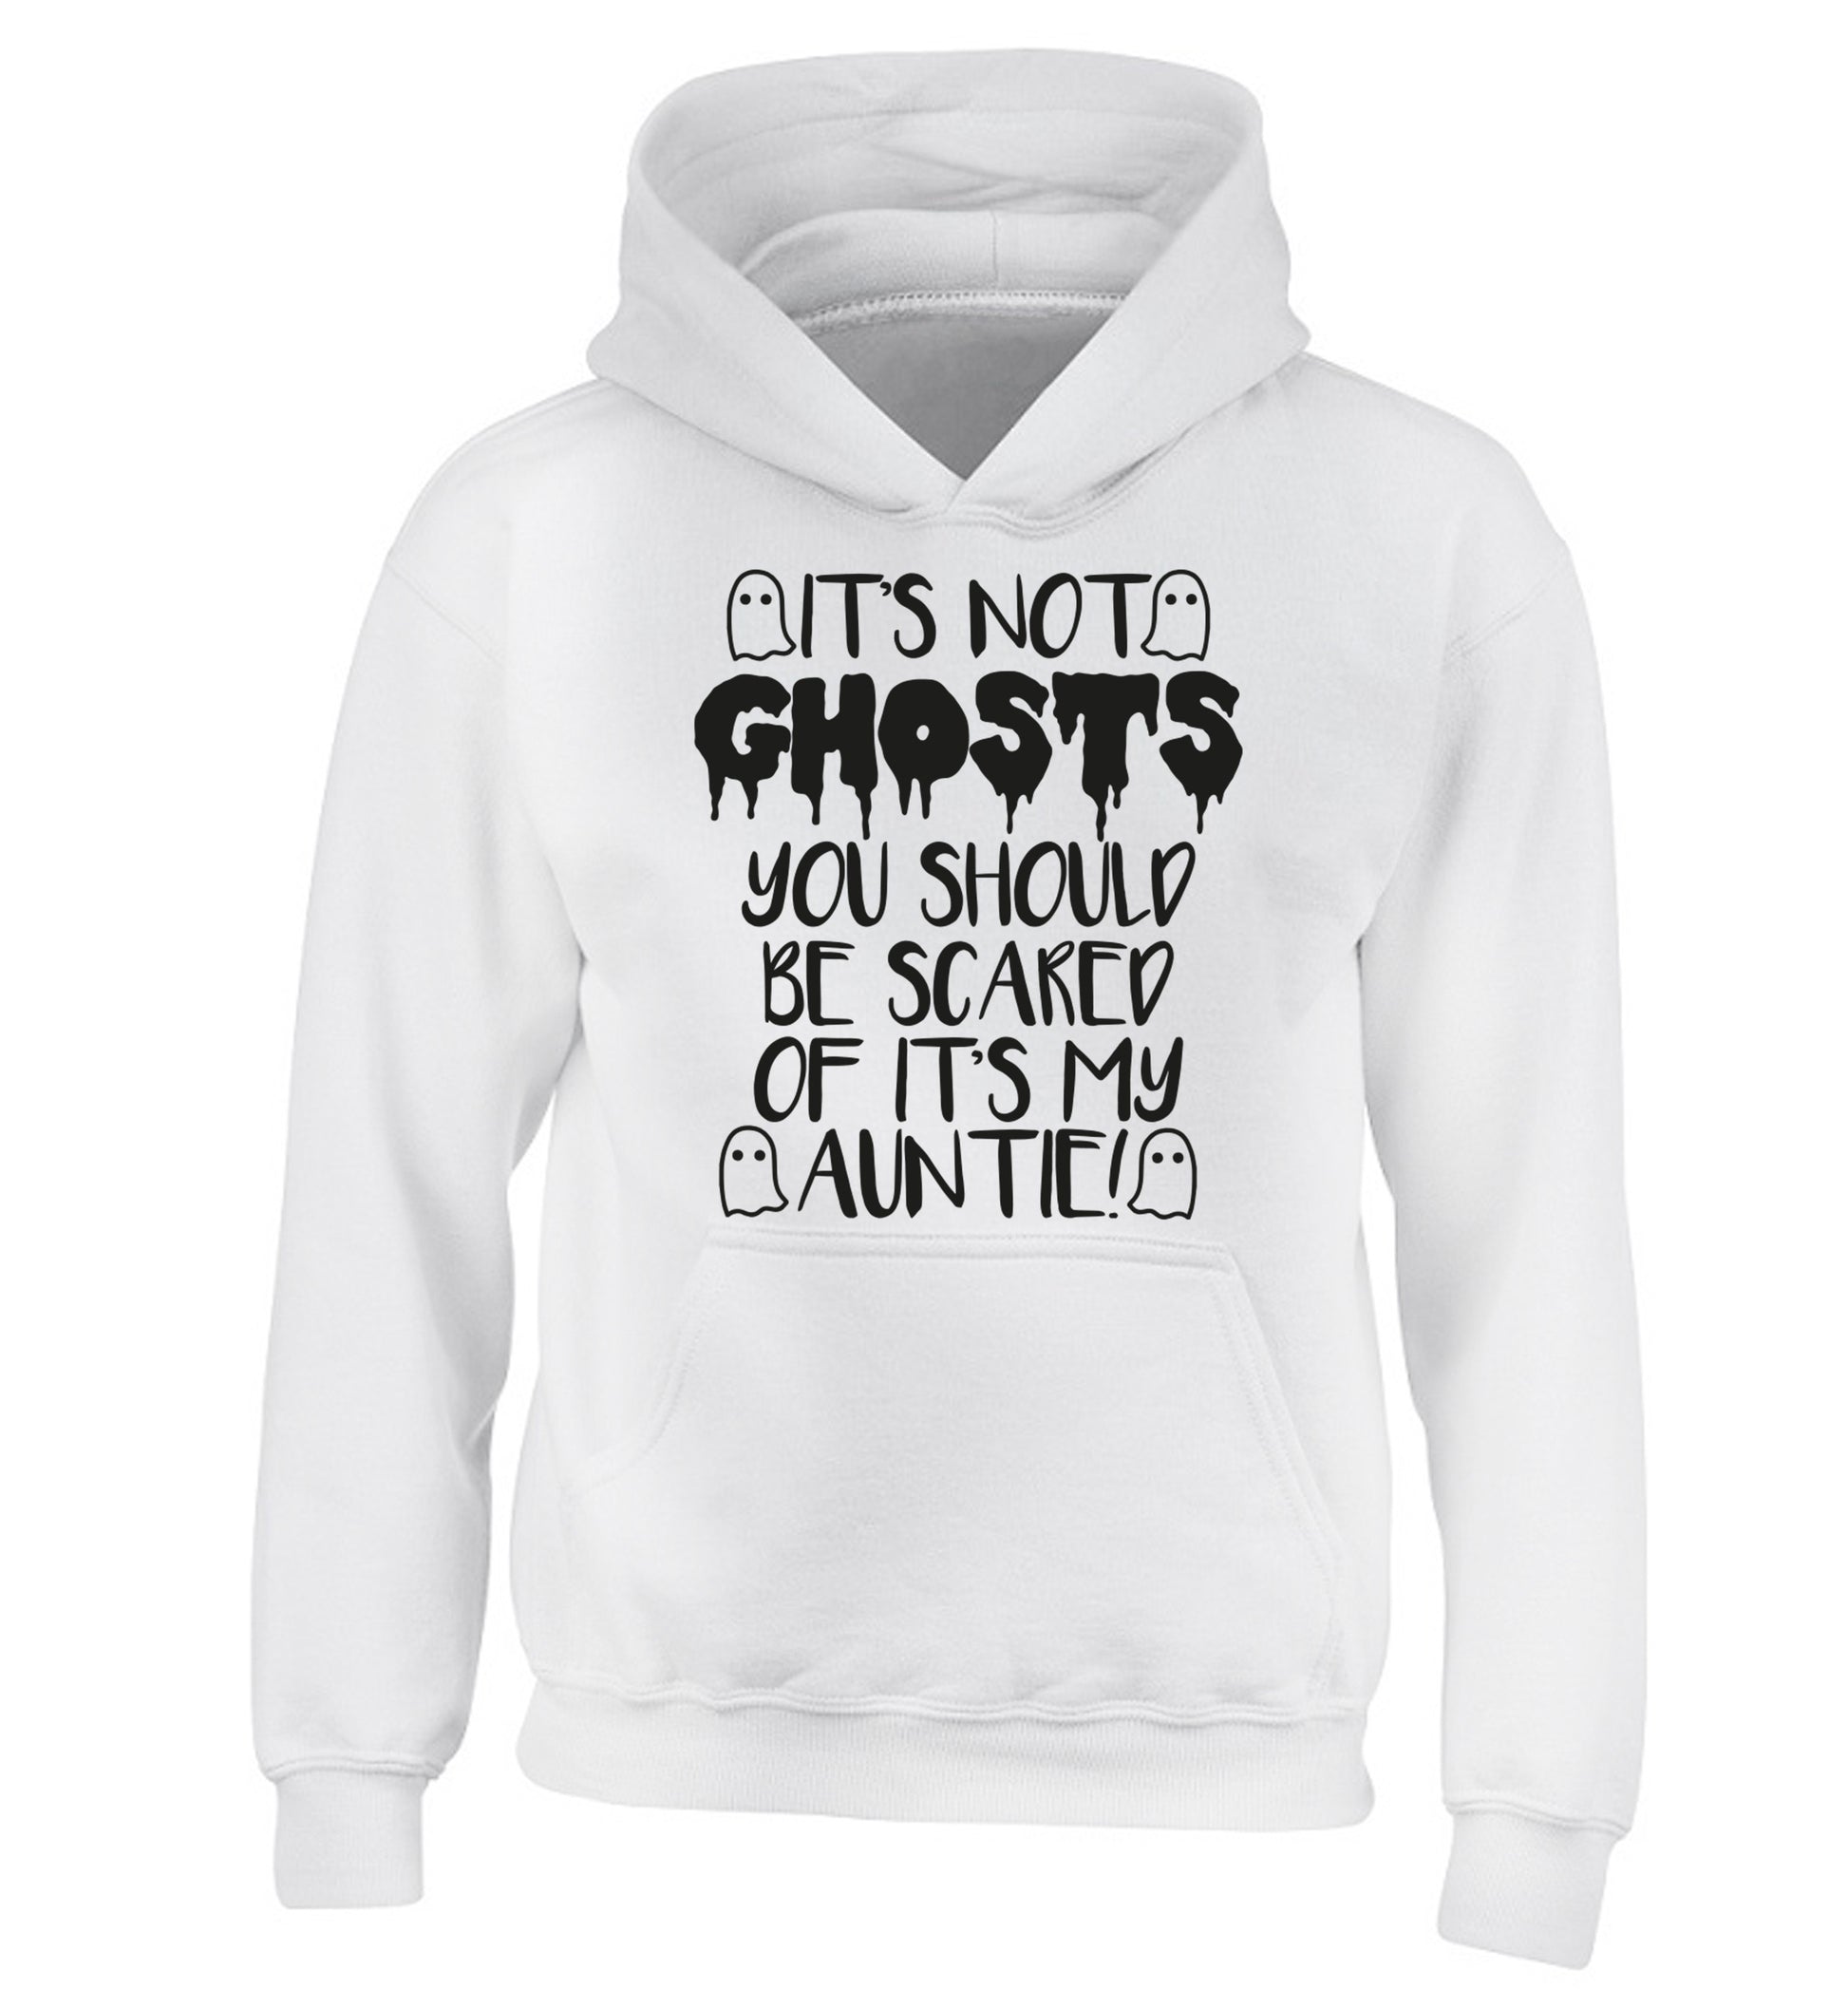 It's not ghosts you should be scared of it's my auntie! children's white hoodie 12-14 Years